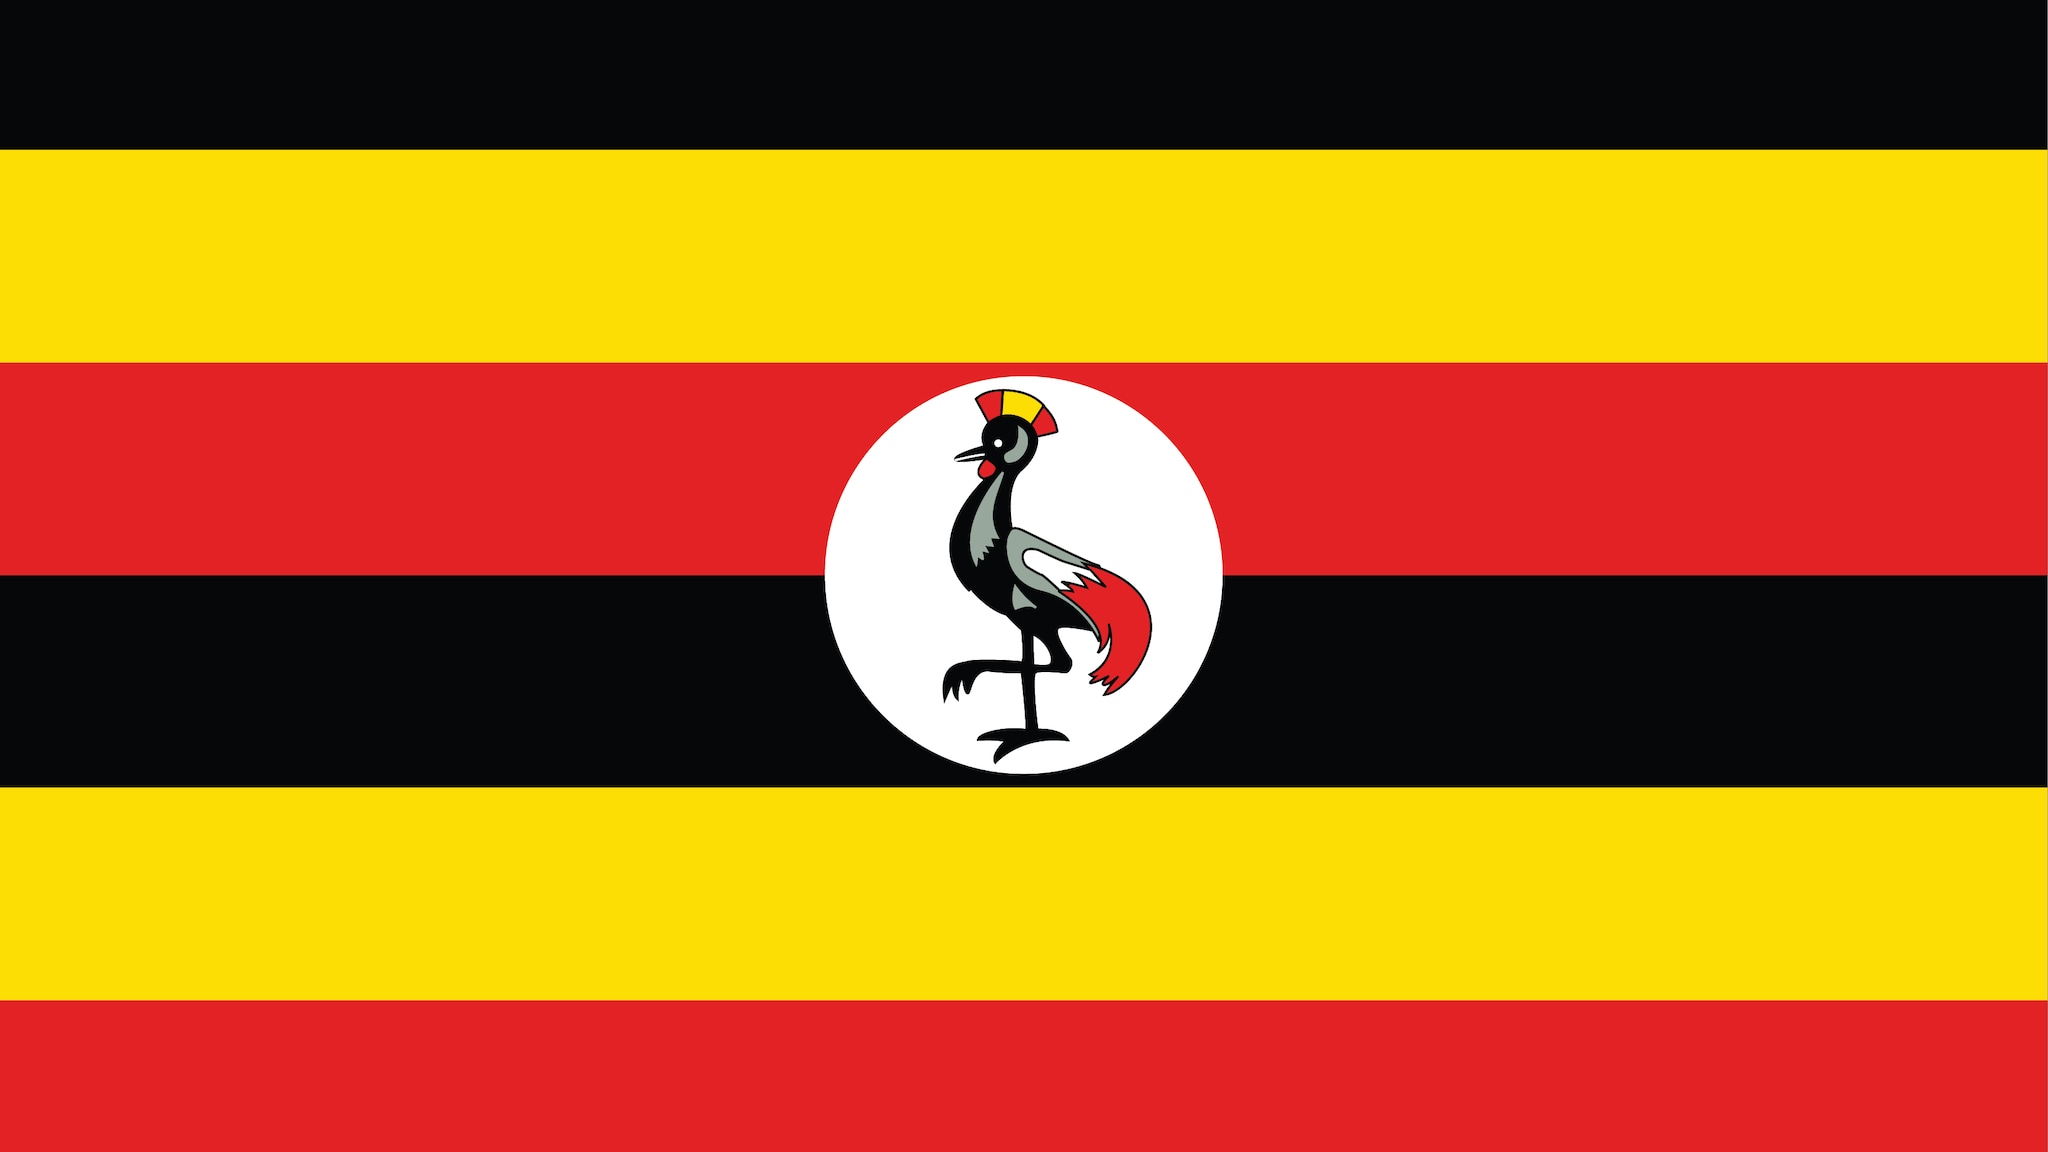 The flag of Uganda consists of six horizontal stripes of black, yellow, and red colors, alternating with each other. The top stripe is black, followed by yellow, then red, and so on. In the center of the flag, there's a white circle, inside which there is a grey crowned crane, the national bird of Uganda, standing on one leg.